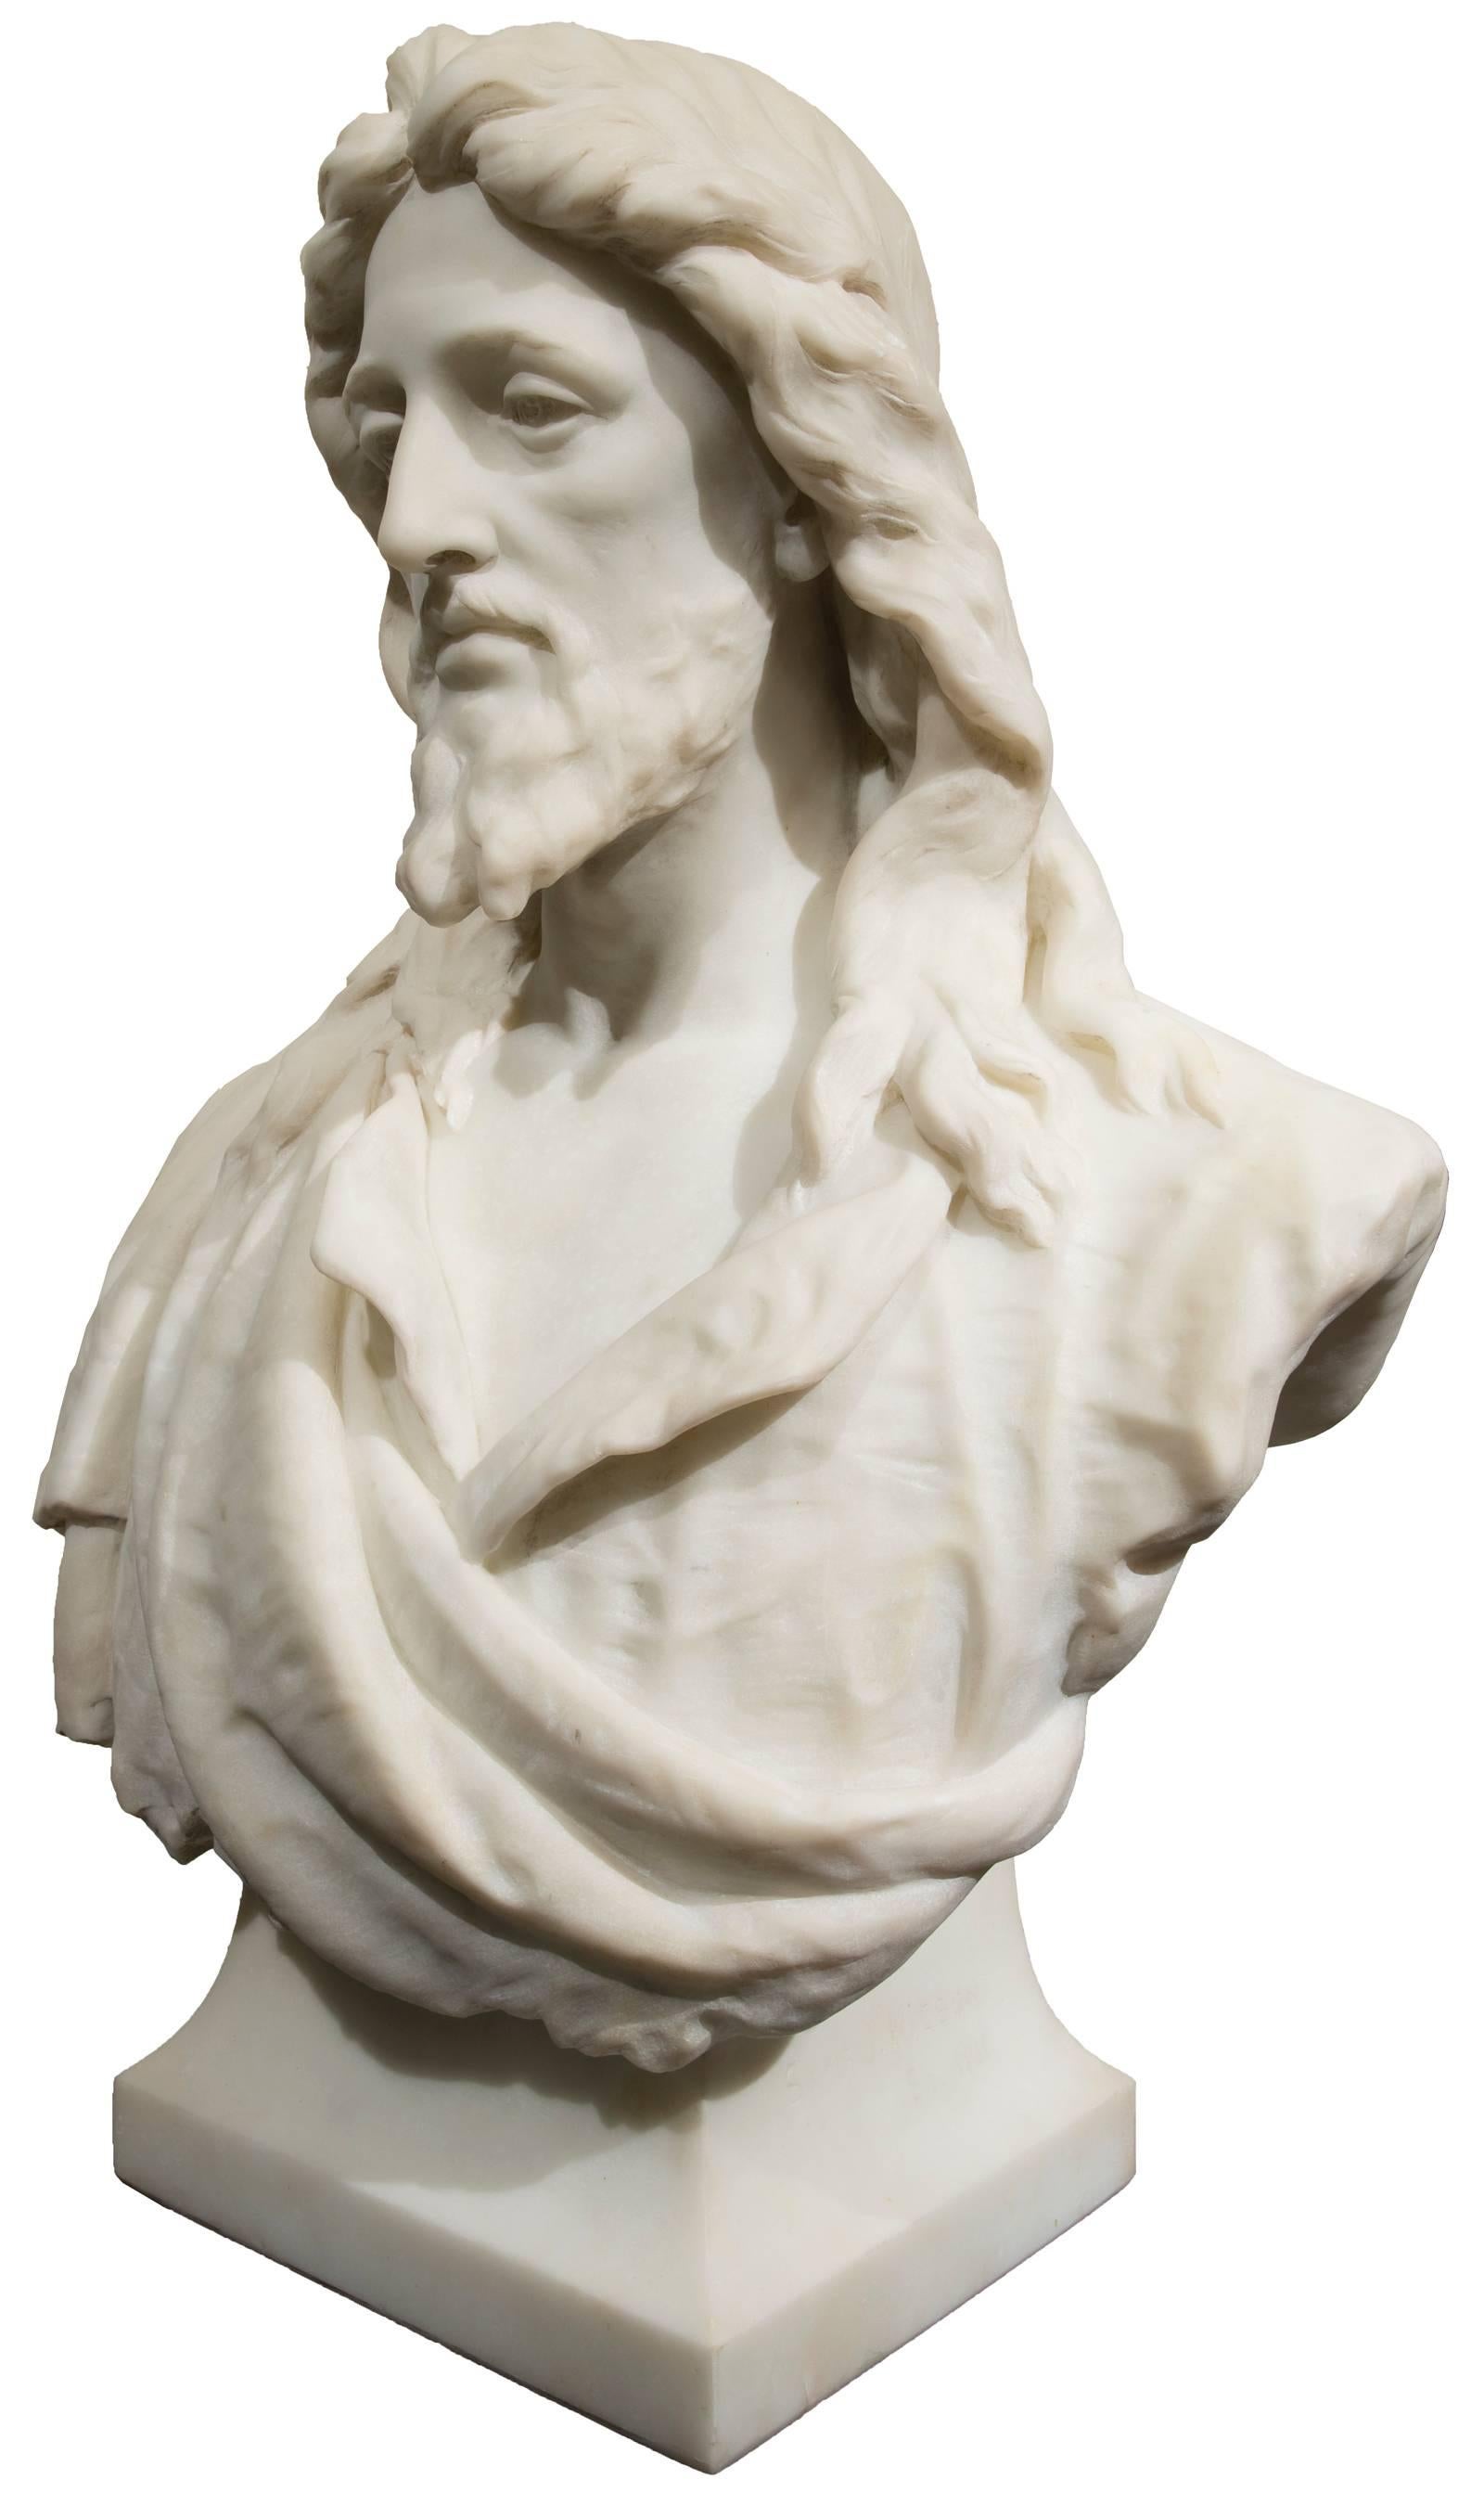 Christ is shown with His head tilted slightly to the right and a sombre downward gaze, stylized hair falling in long waves on the shoulders and folds of His tunic. The deeply carved white marble lends to the highly representational element of the